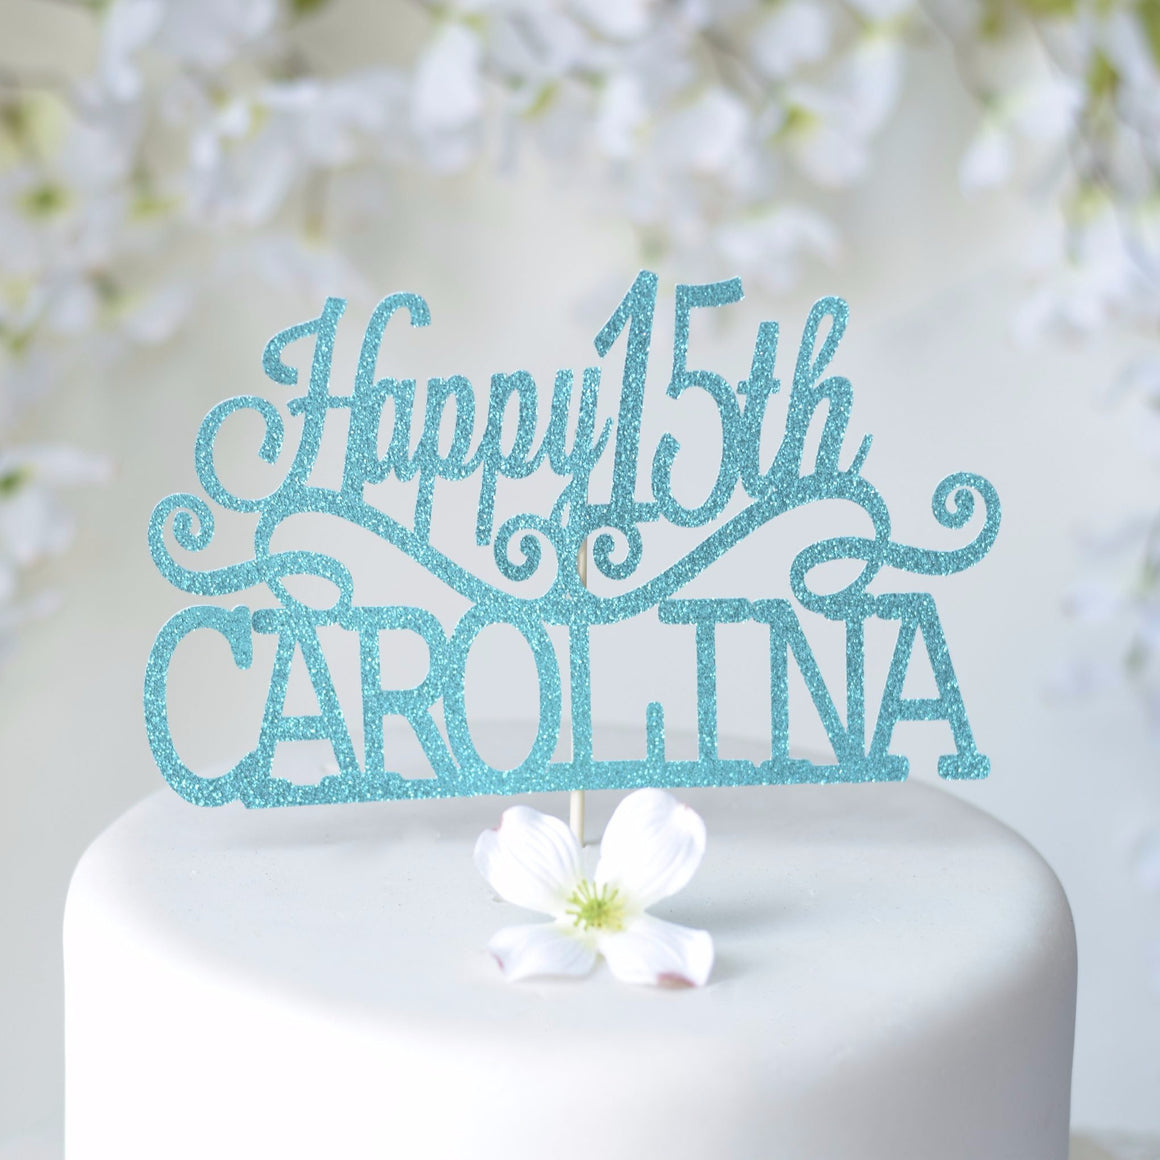 Happy 15th Carolina Quinceañera cake topper with blue and teal sparkles